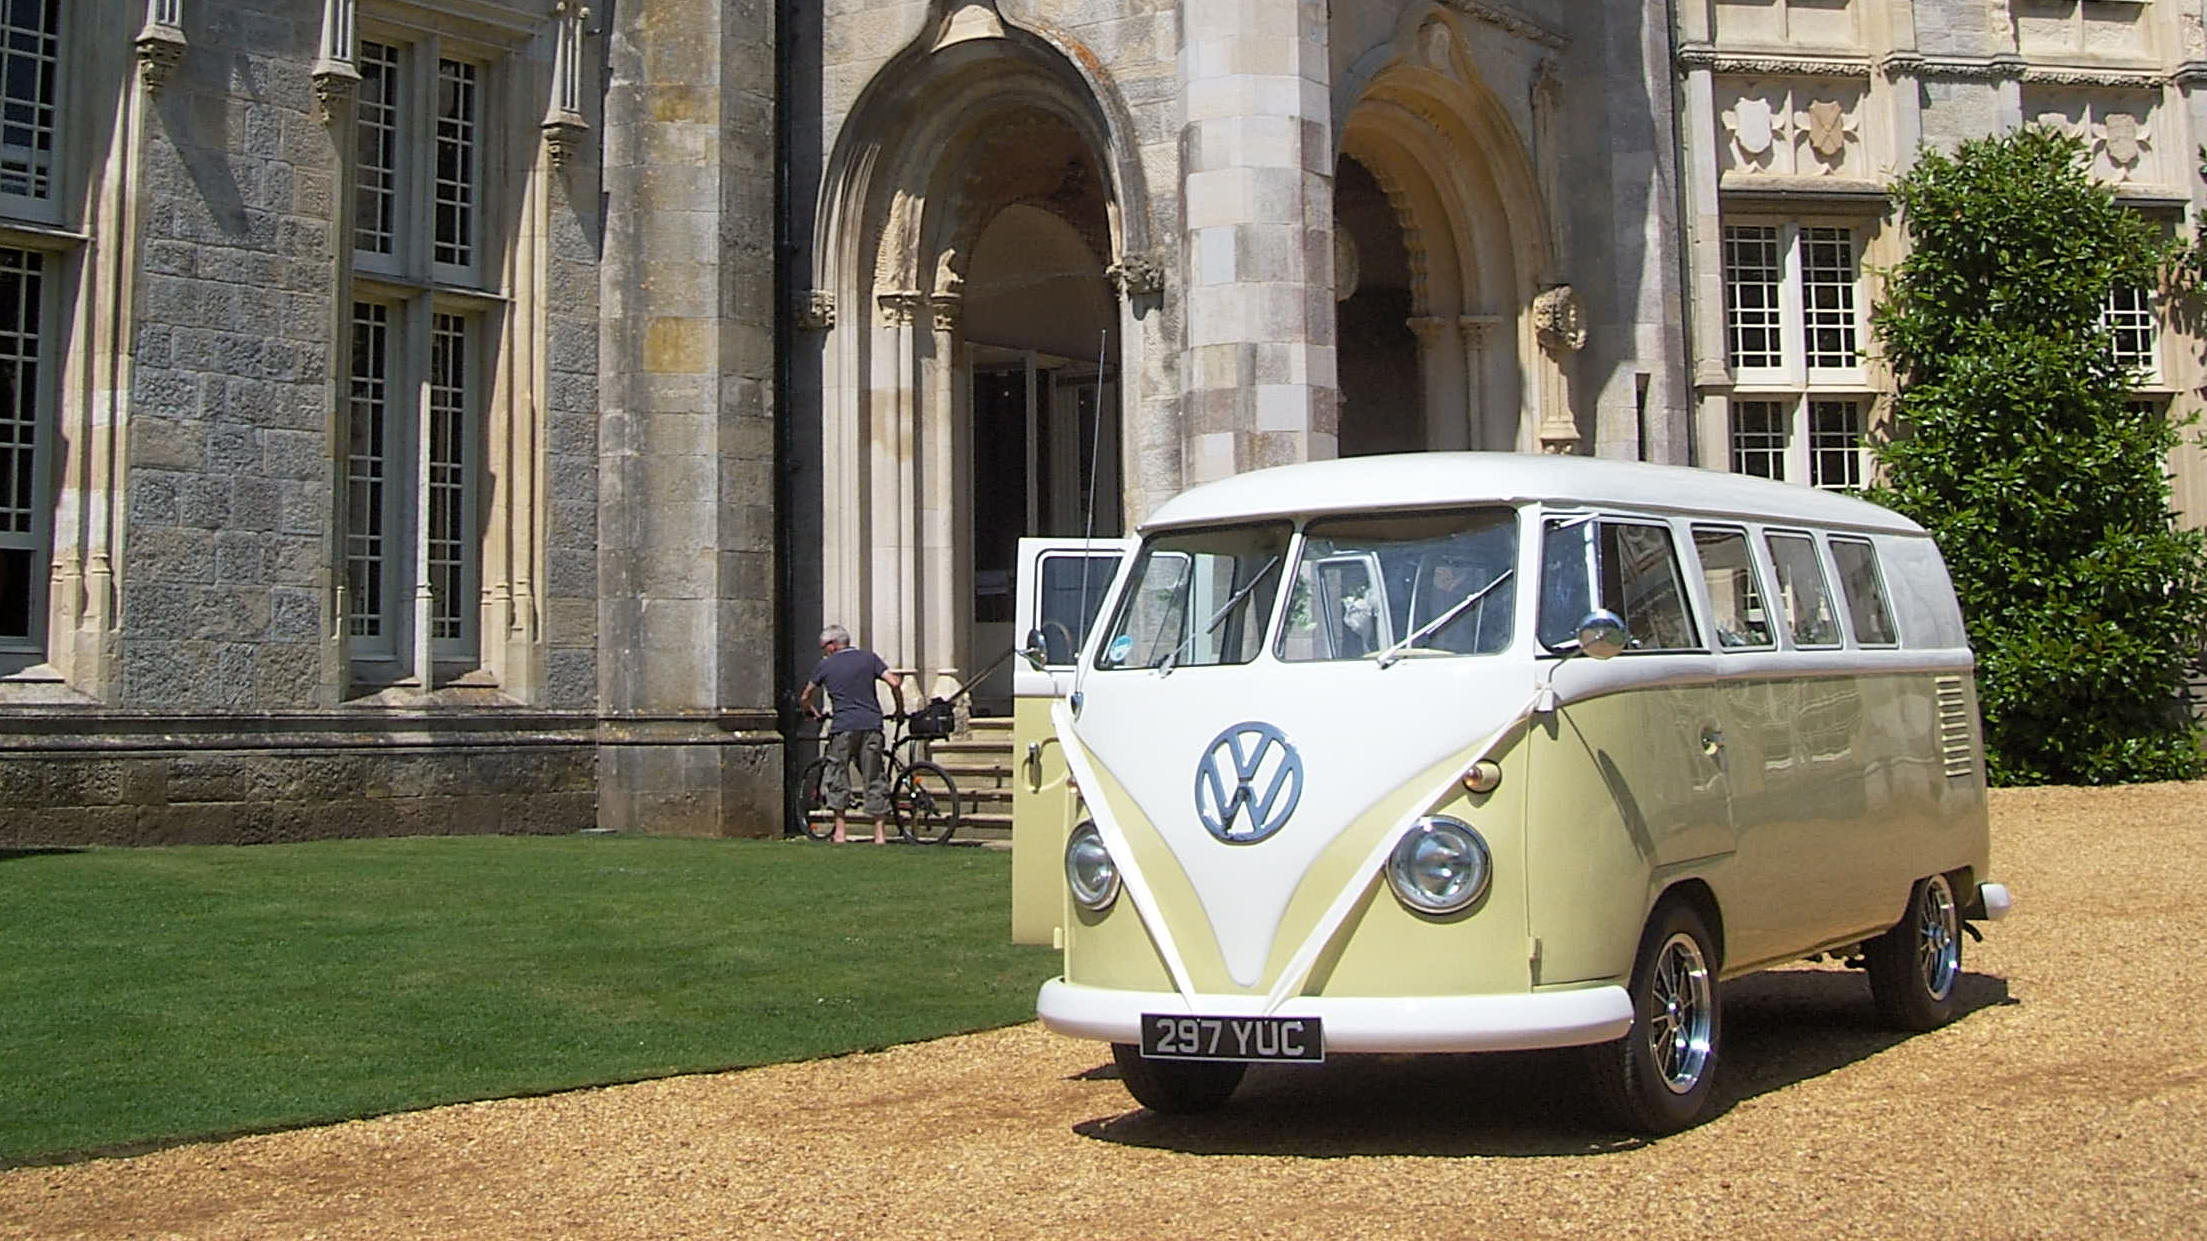 Retro Classic Volkswagen Campervan decorated with white ribbons at a local Charmouth wedding venue.